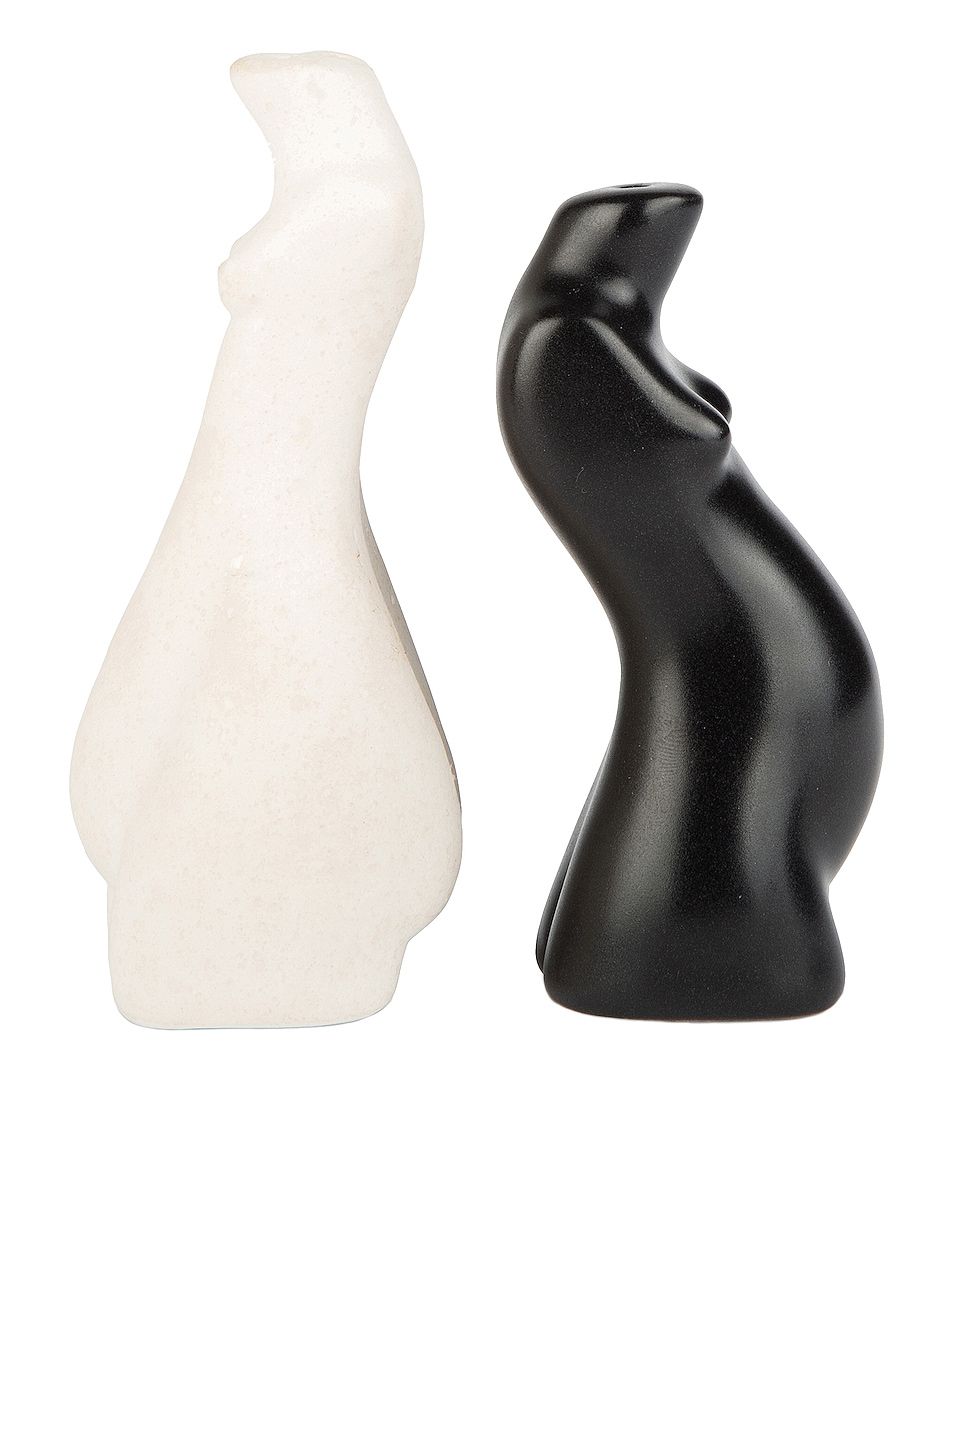 Image 1 of Anissa Kermiche Body Salt and Pepper Shakers Pair in Black & White